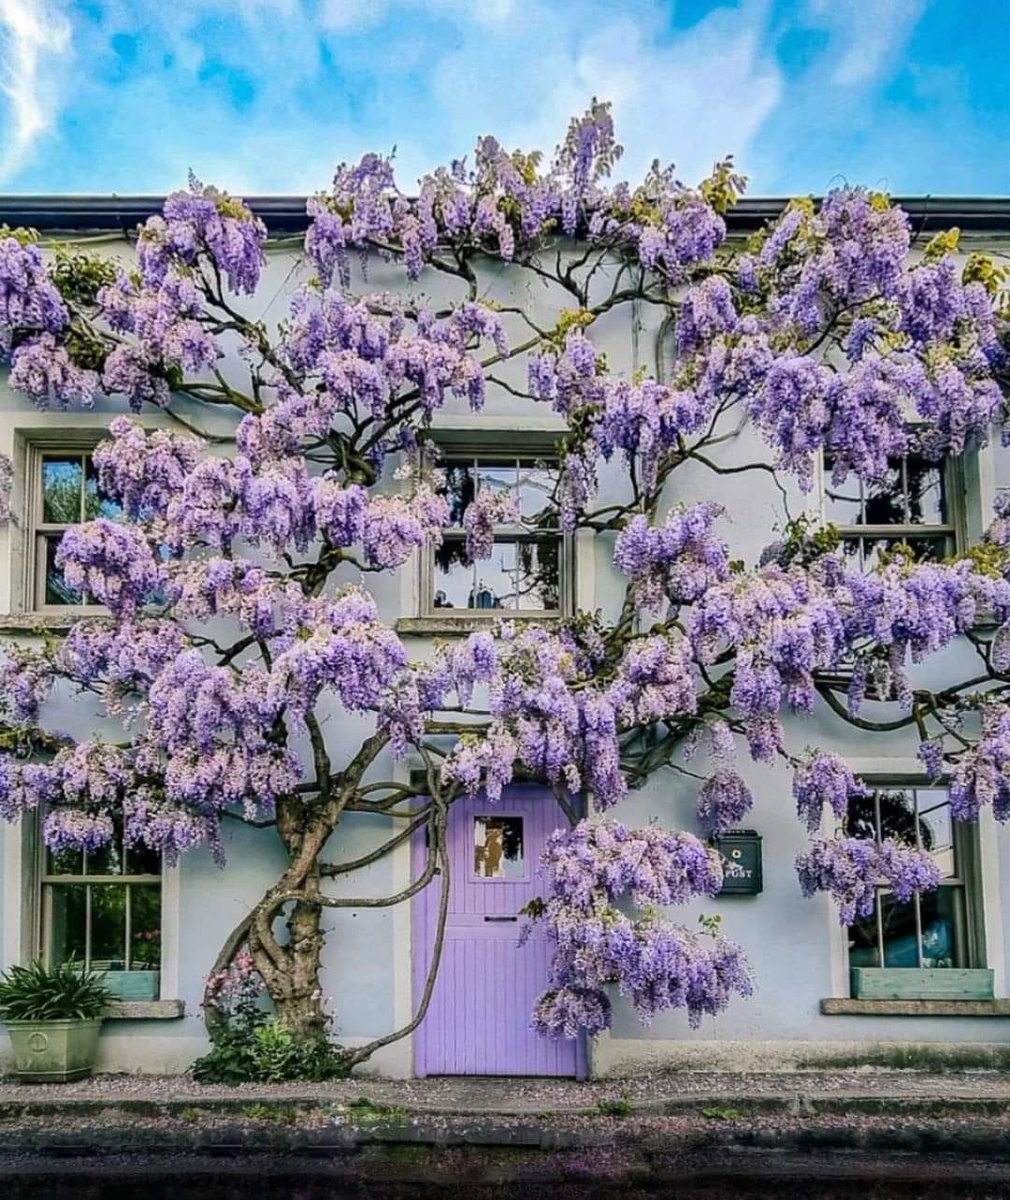 This wisteria-covered house in Inistioge, County Kilkenny, is surely one of the most Instagrammed spots in Ireland! 
Thanks to @luisteix for this lovely pic.
#ireland #loveireland #kilkenny #visitireland #tourismireland
County Kilkenny Ireland things to see and do…